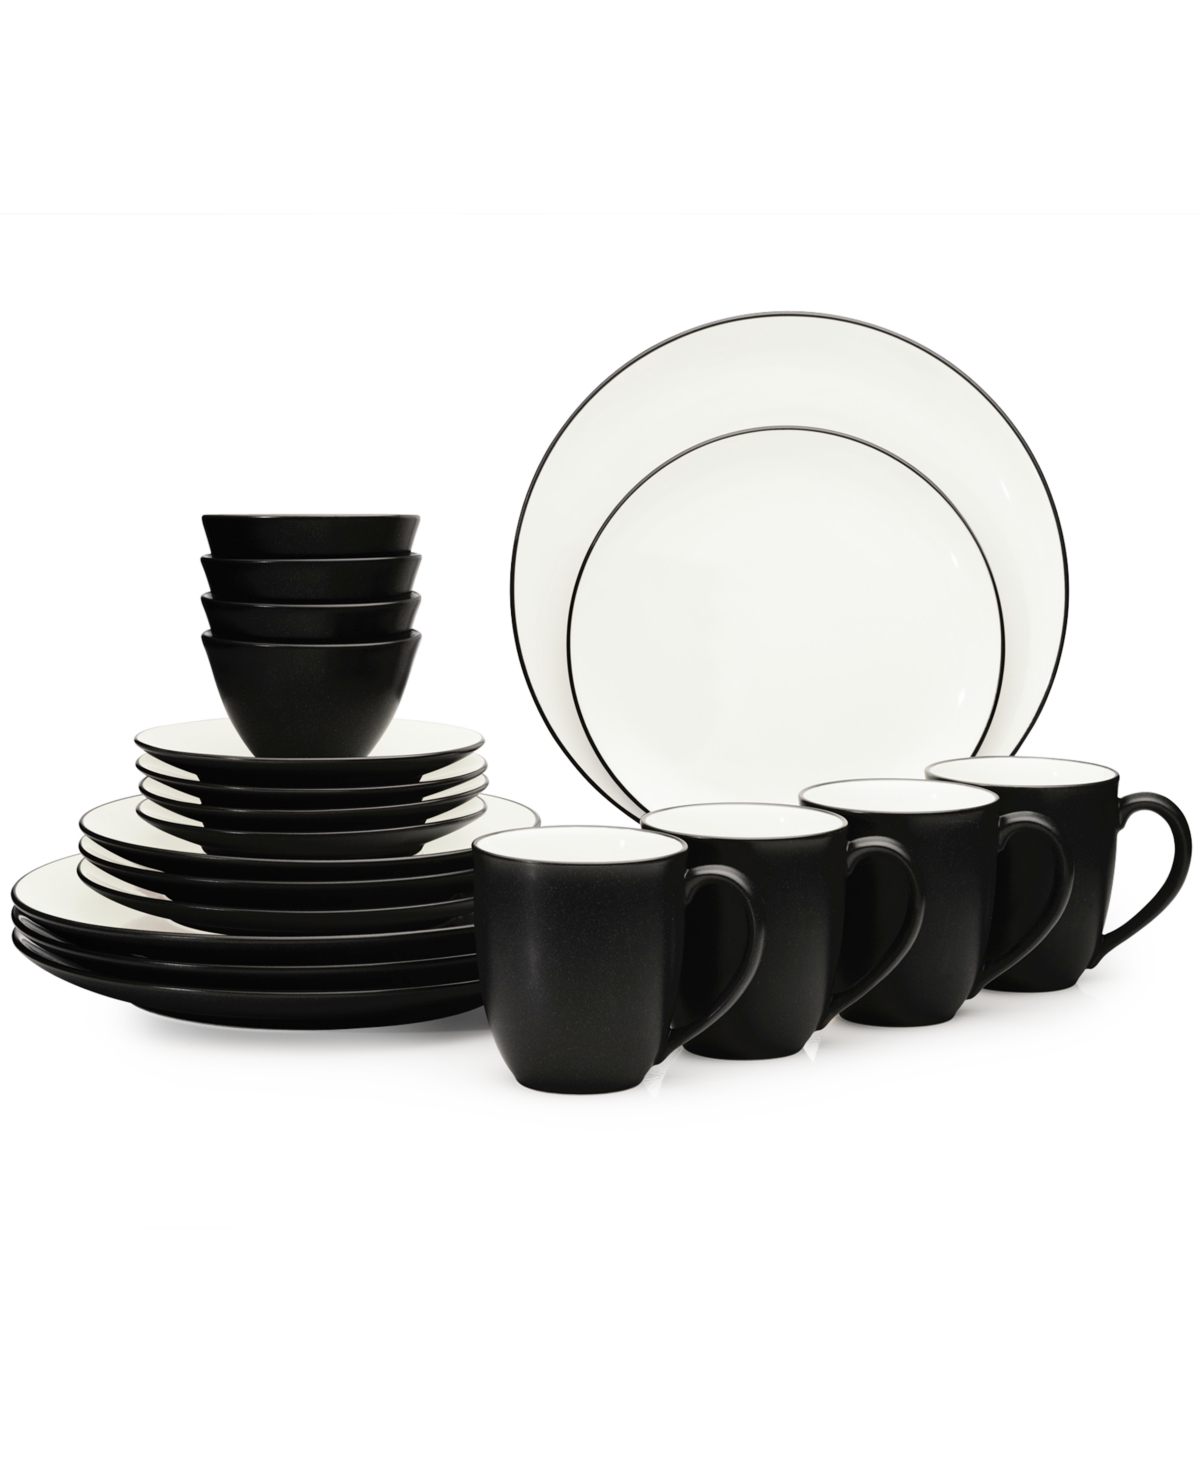 Colorwave 20-Pc. Coupe Dinnerware Set, Service for 4 - Sand